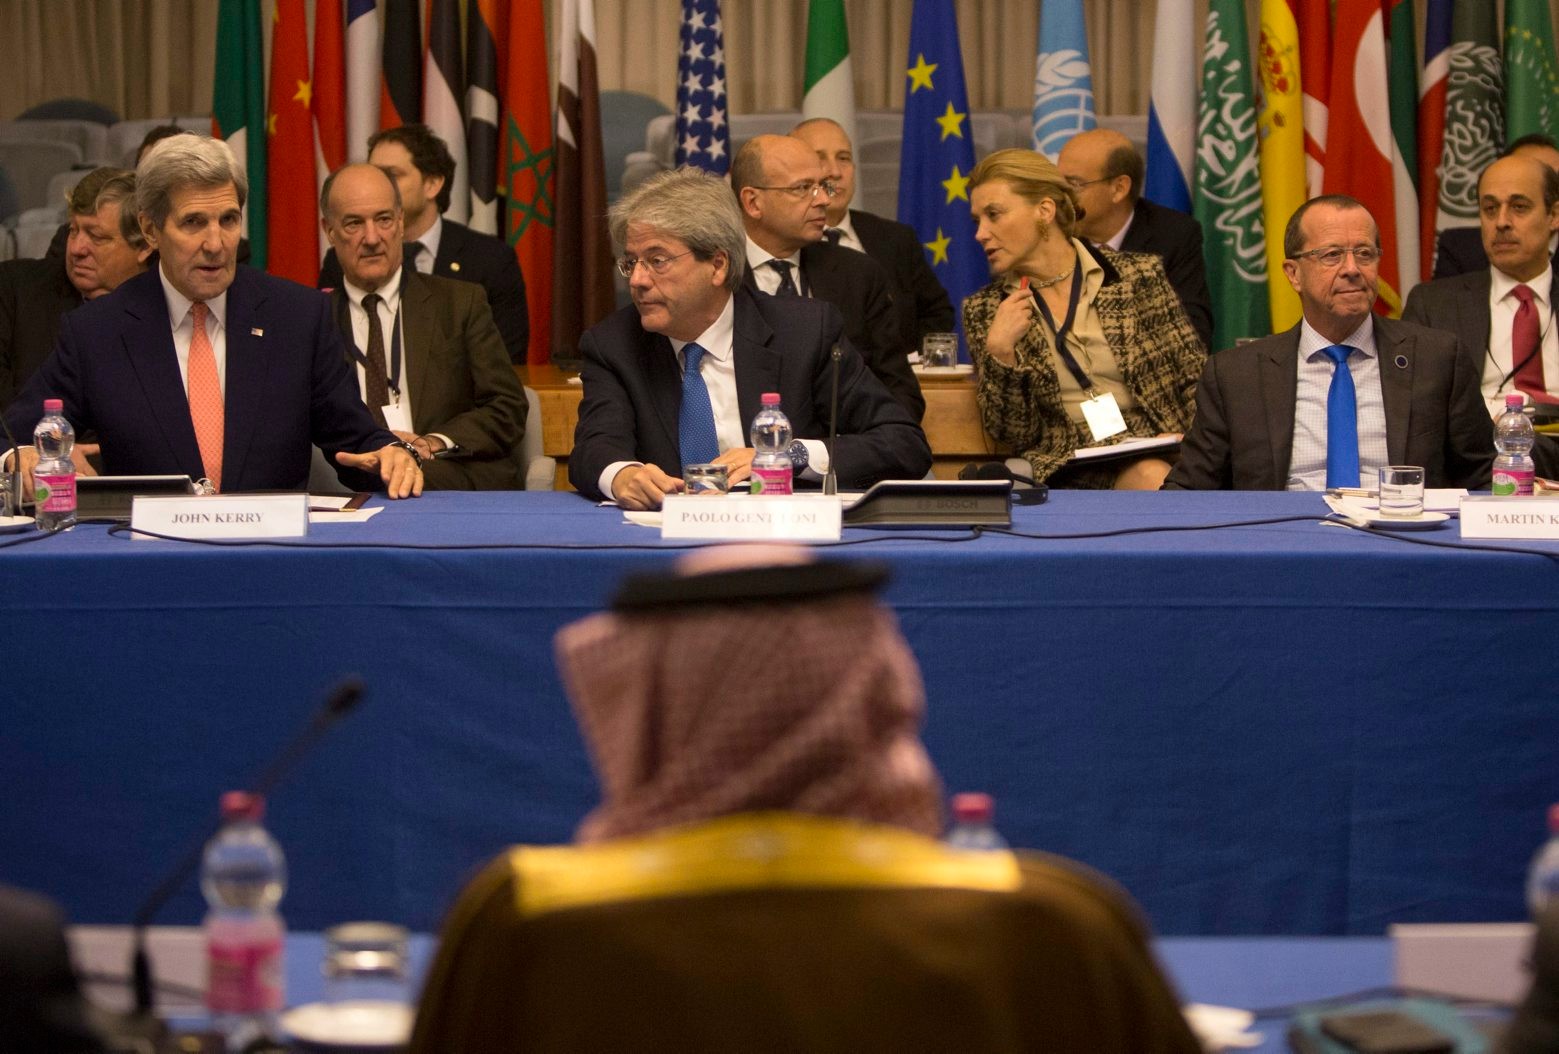 From left, US Secretary of State John Kerry, Italian Foreign Minister Paolo Gentiloni and Special Representative of the UN Secretary-General for Libya Martin Kobler wait for the start of a conference on Libya at the Italian Foreign Ministry headquarters in Rome, Sunday, Dec. 13, 2015.  Foreign ministers were poised to endorse a U.N.-brokered national unity plan for Libya at a Rome conference aimed at prodding the North Africa country's bickering factions to fulfill their commitment to sign the agreement and abide by its terms. (AP Photo/Riccardo De Luca) Italy EU Libya